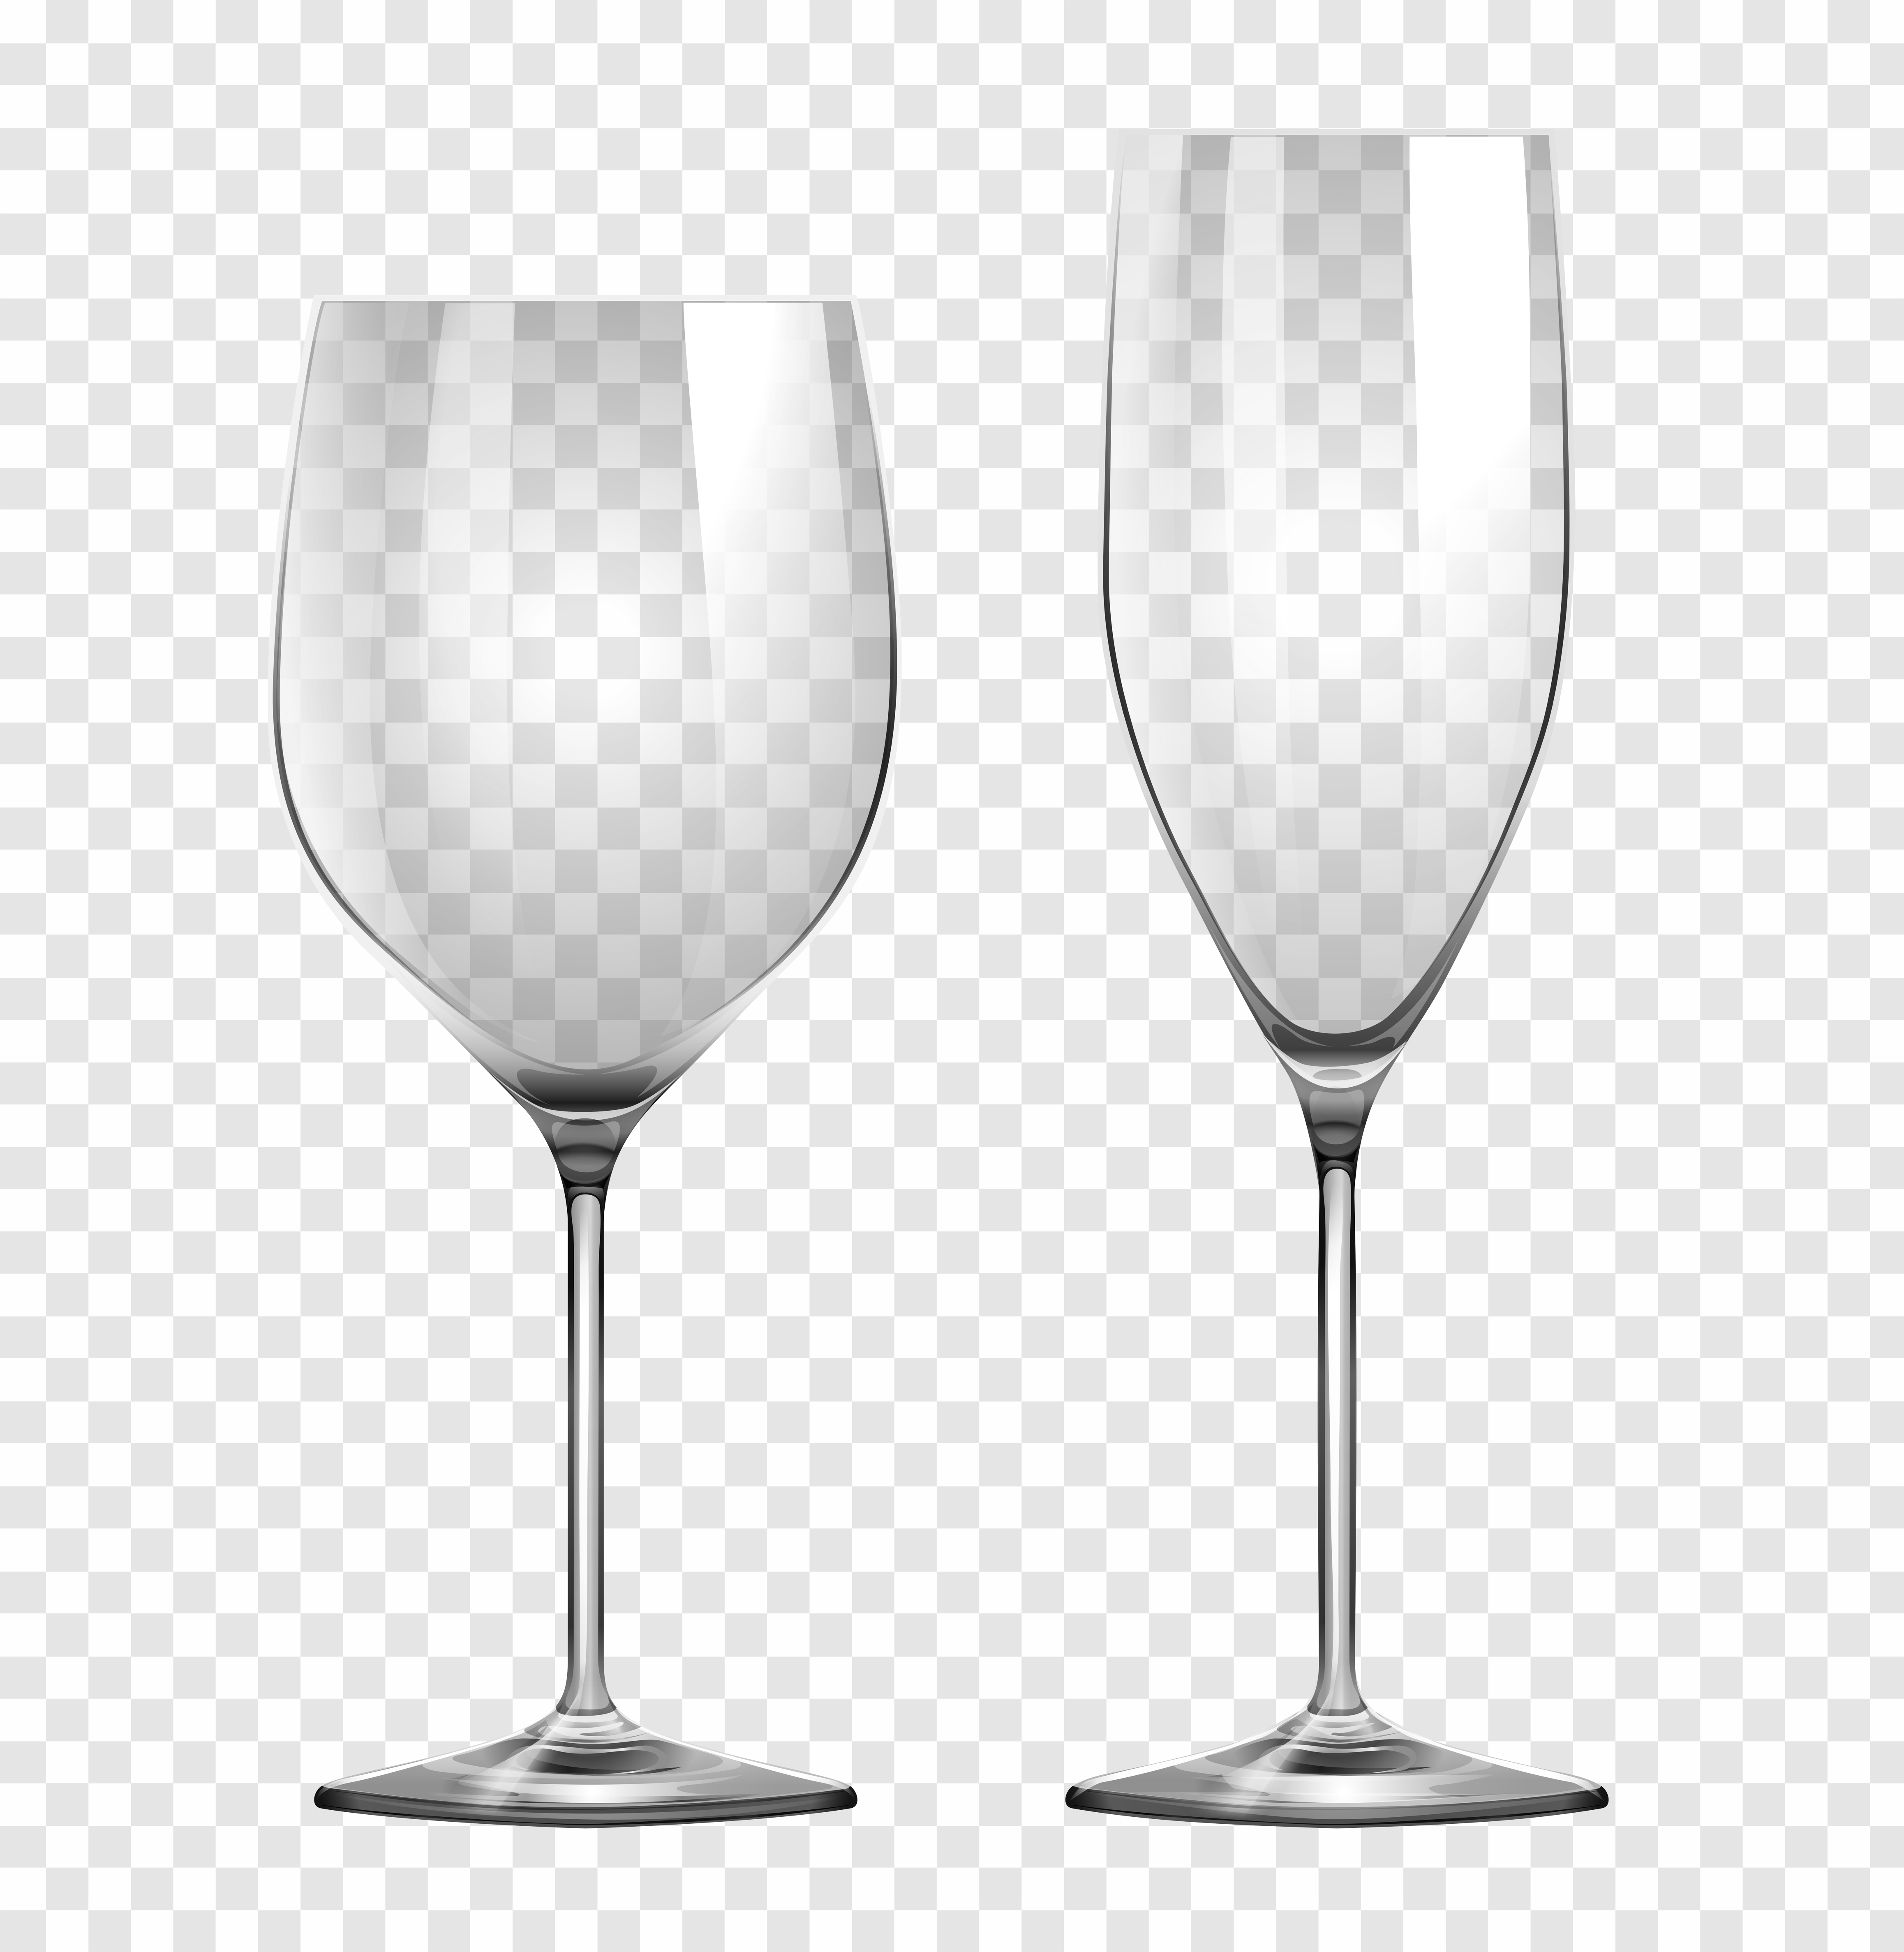 Download Two types of wine glasses 300825 - Download Free Vectors, Clipart Graphics & Vector Art